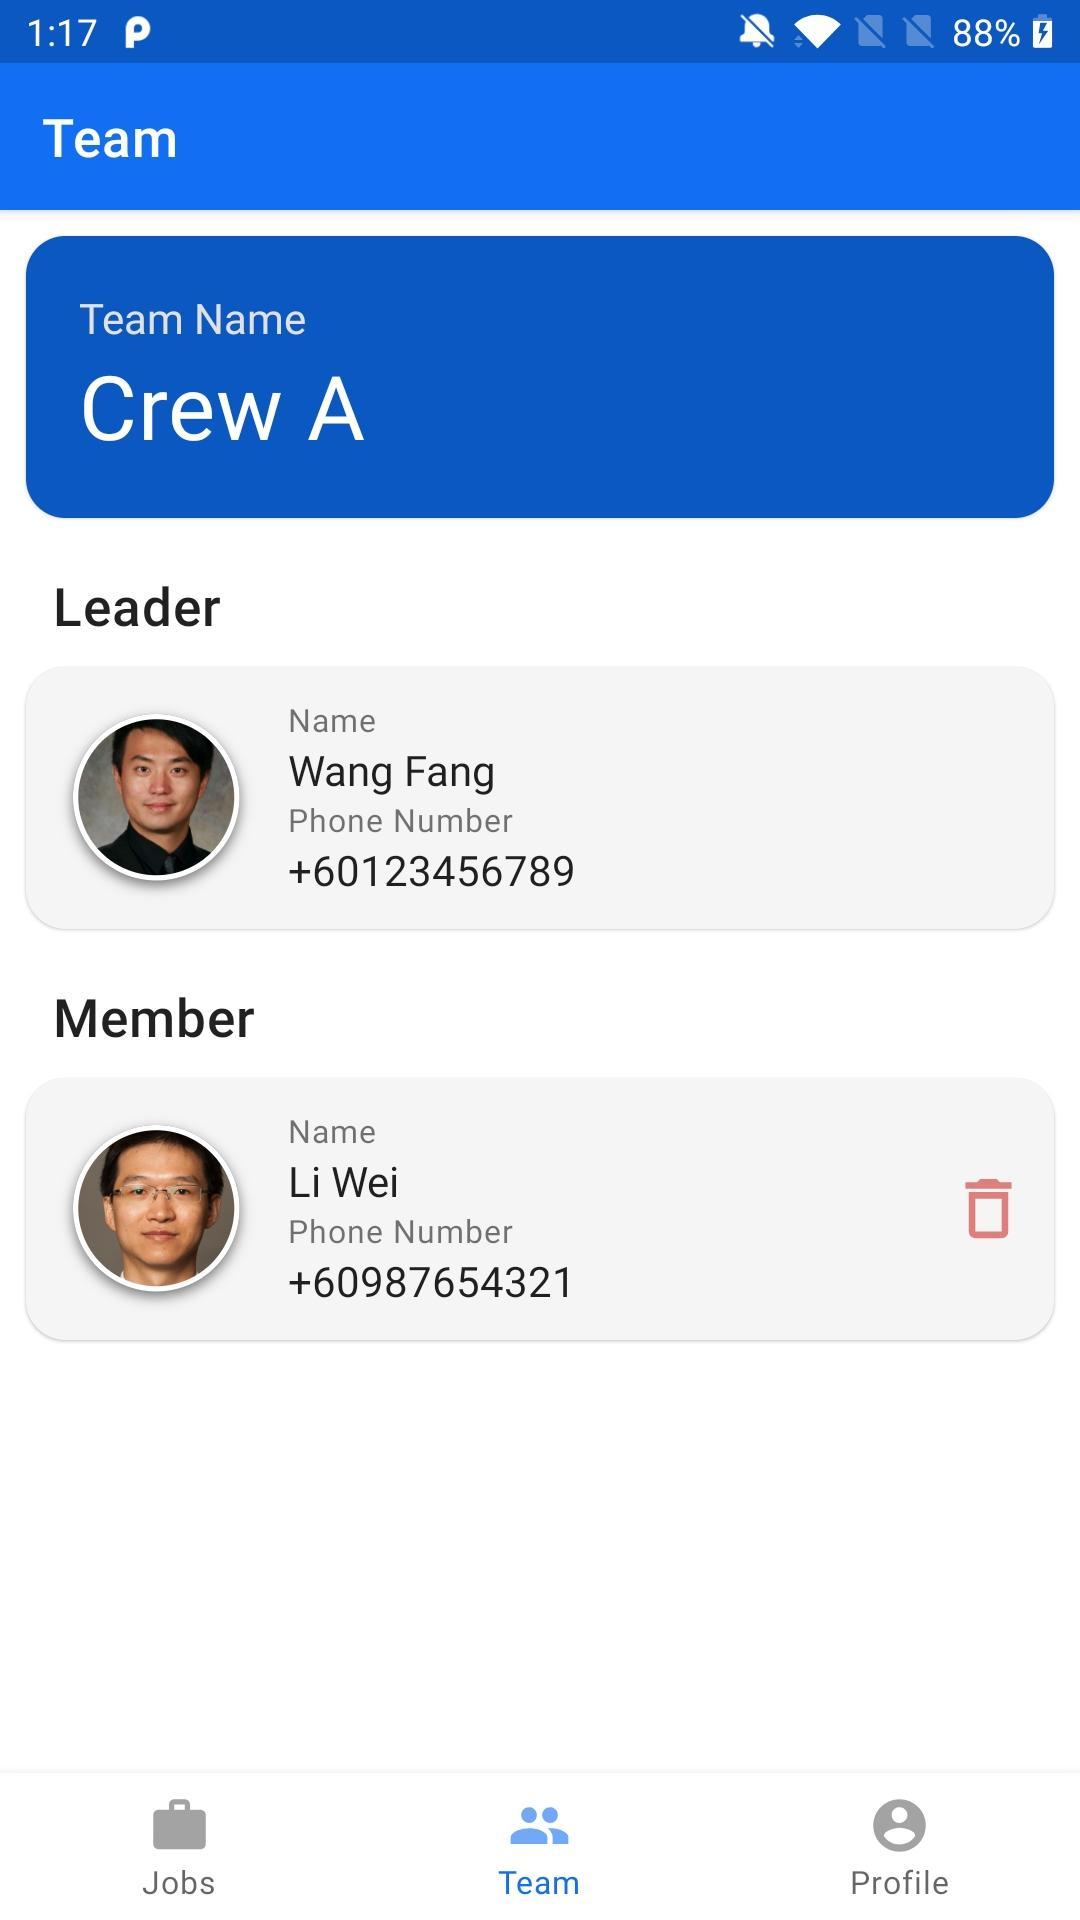 ANG Family Home Services - Crew 1.0.6 Screenshot 17